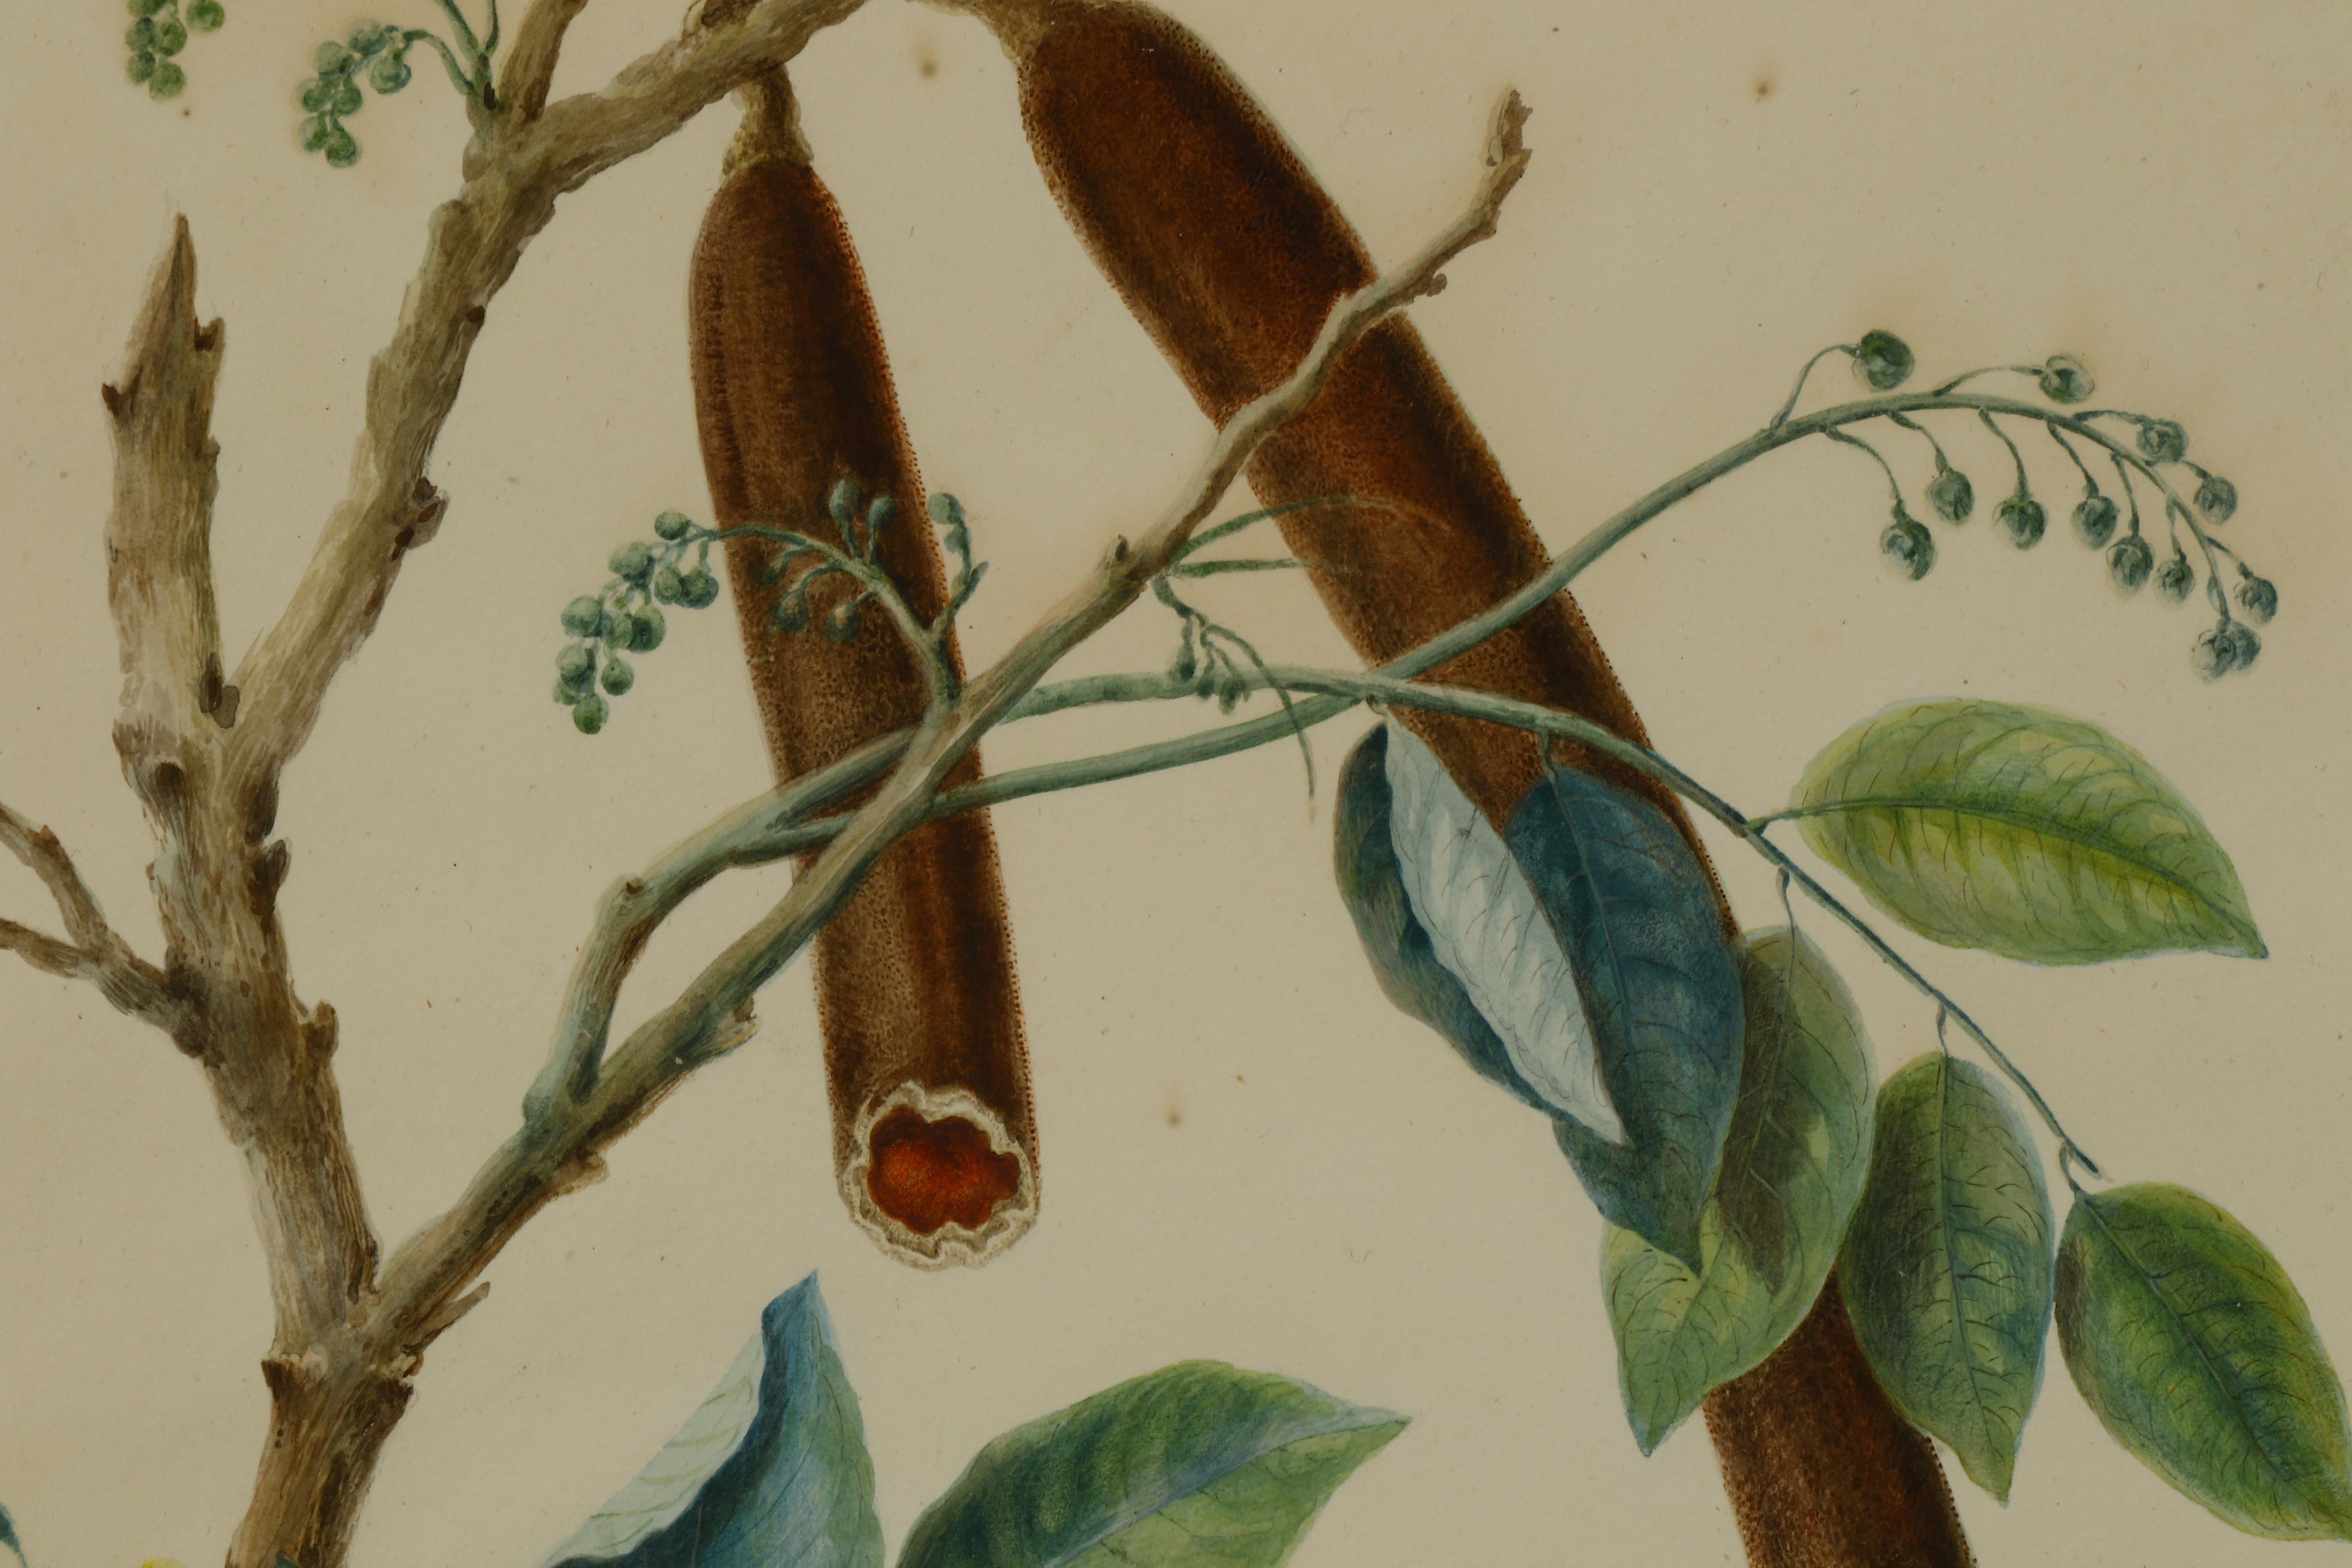 A BOTANICAL PAINTING OF A FLOWERING CASSIA FISTULA OR AMALTAS - Image 4 of 5